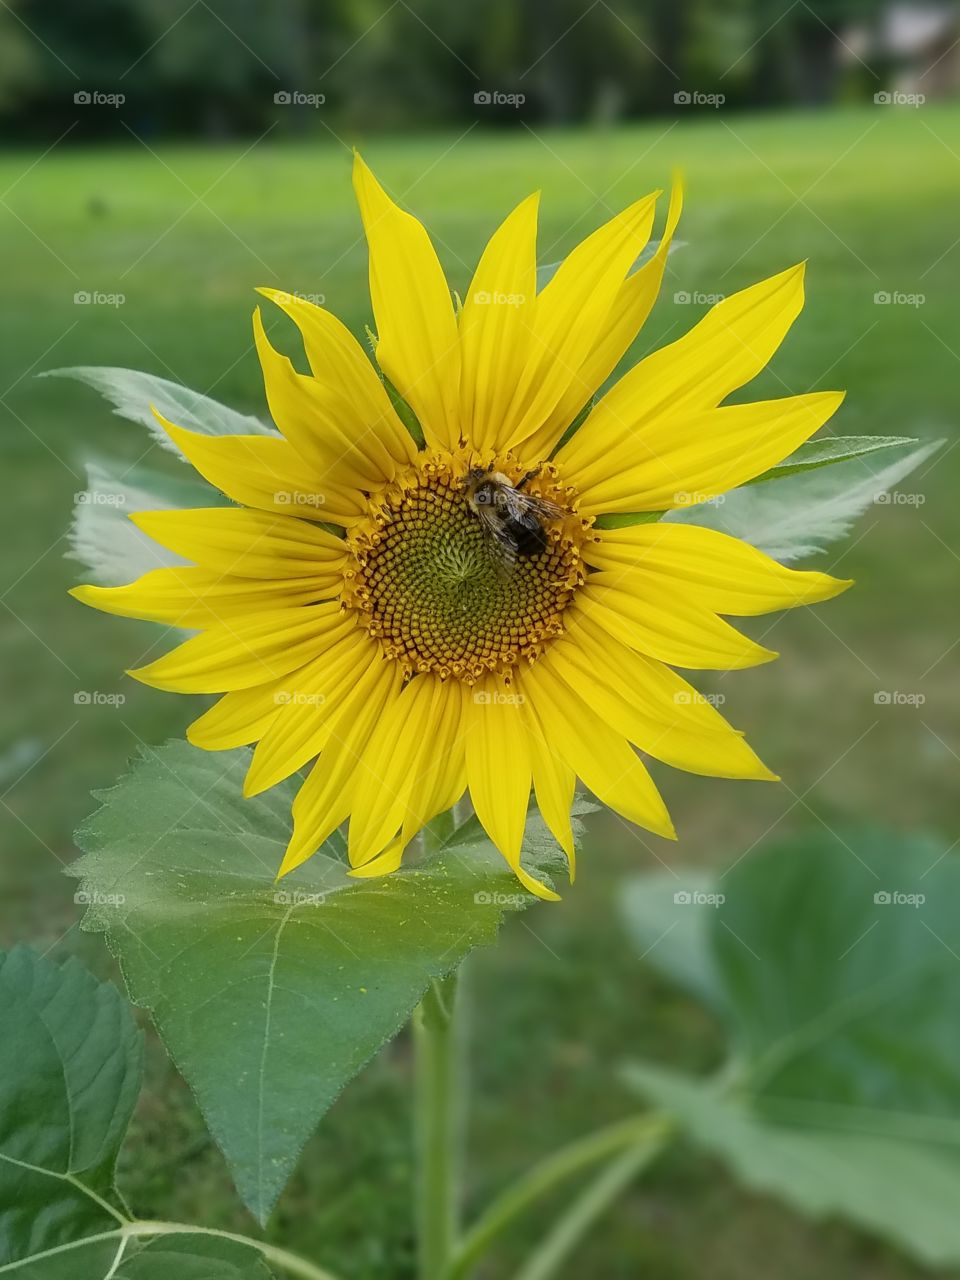 Bee pollinating a Sunflower